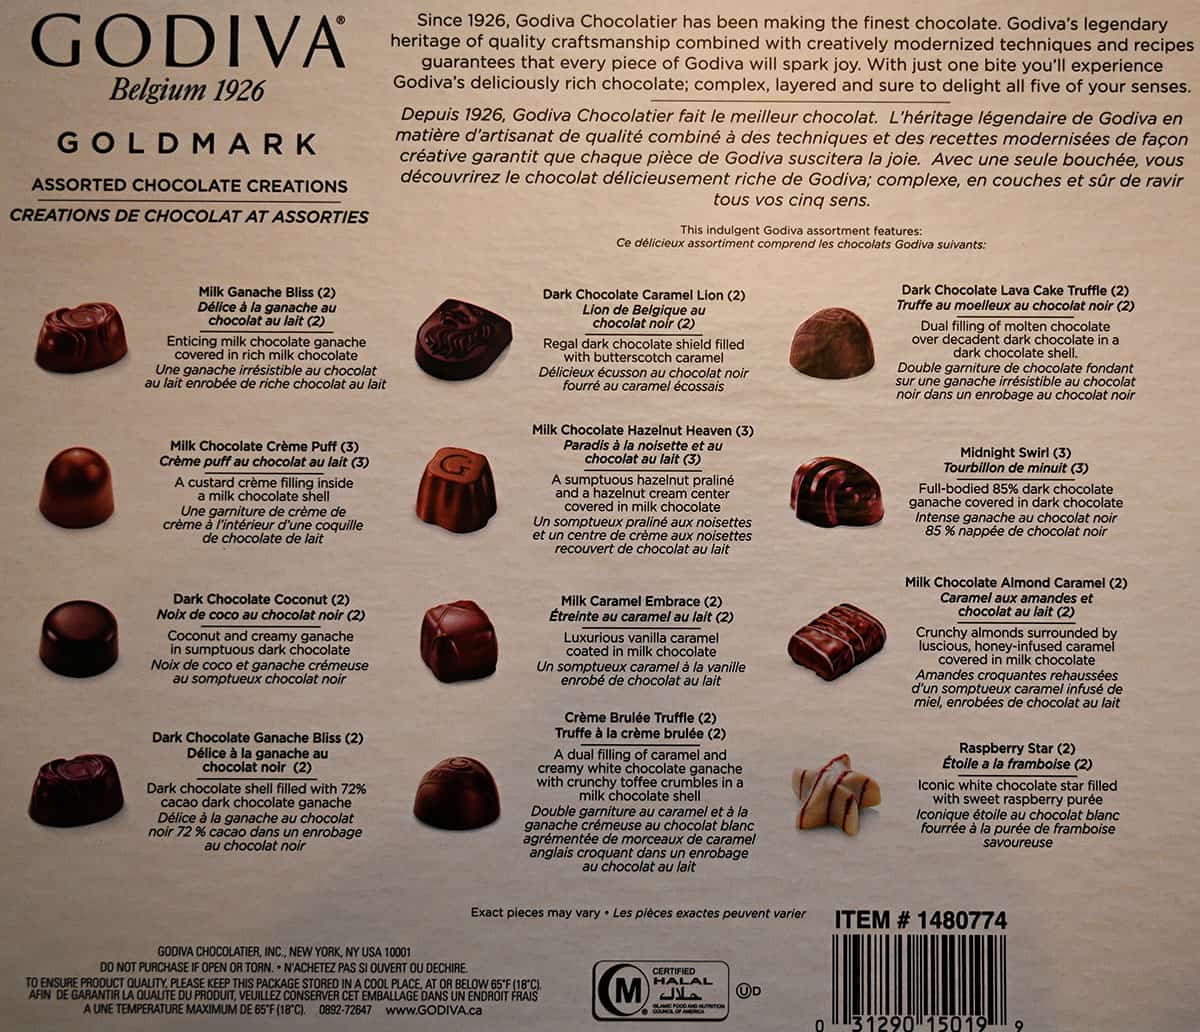 Image of the back of the box of chocolates showing the guide that explains all the different kinds of chocolates in the box.